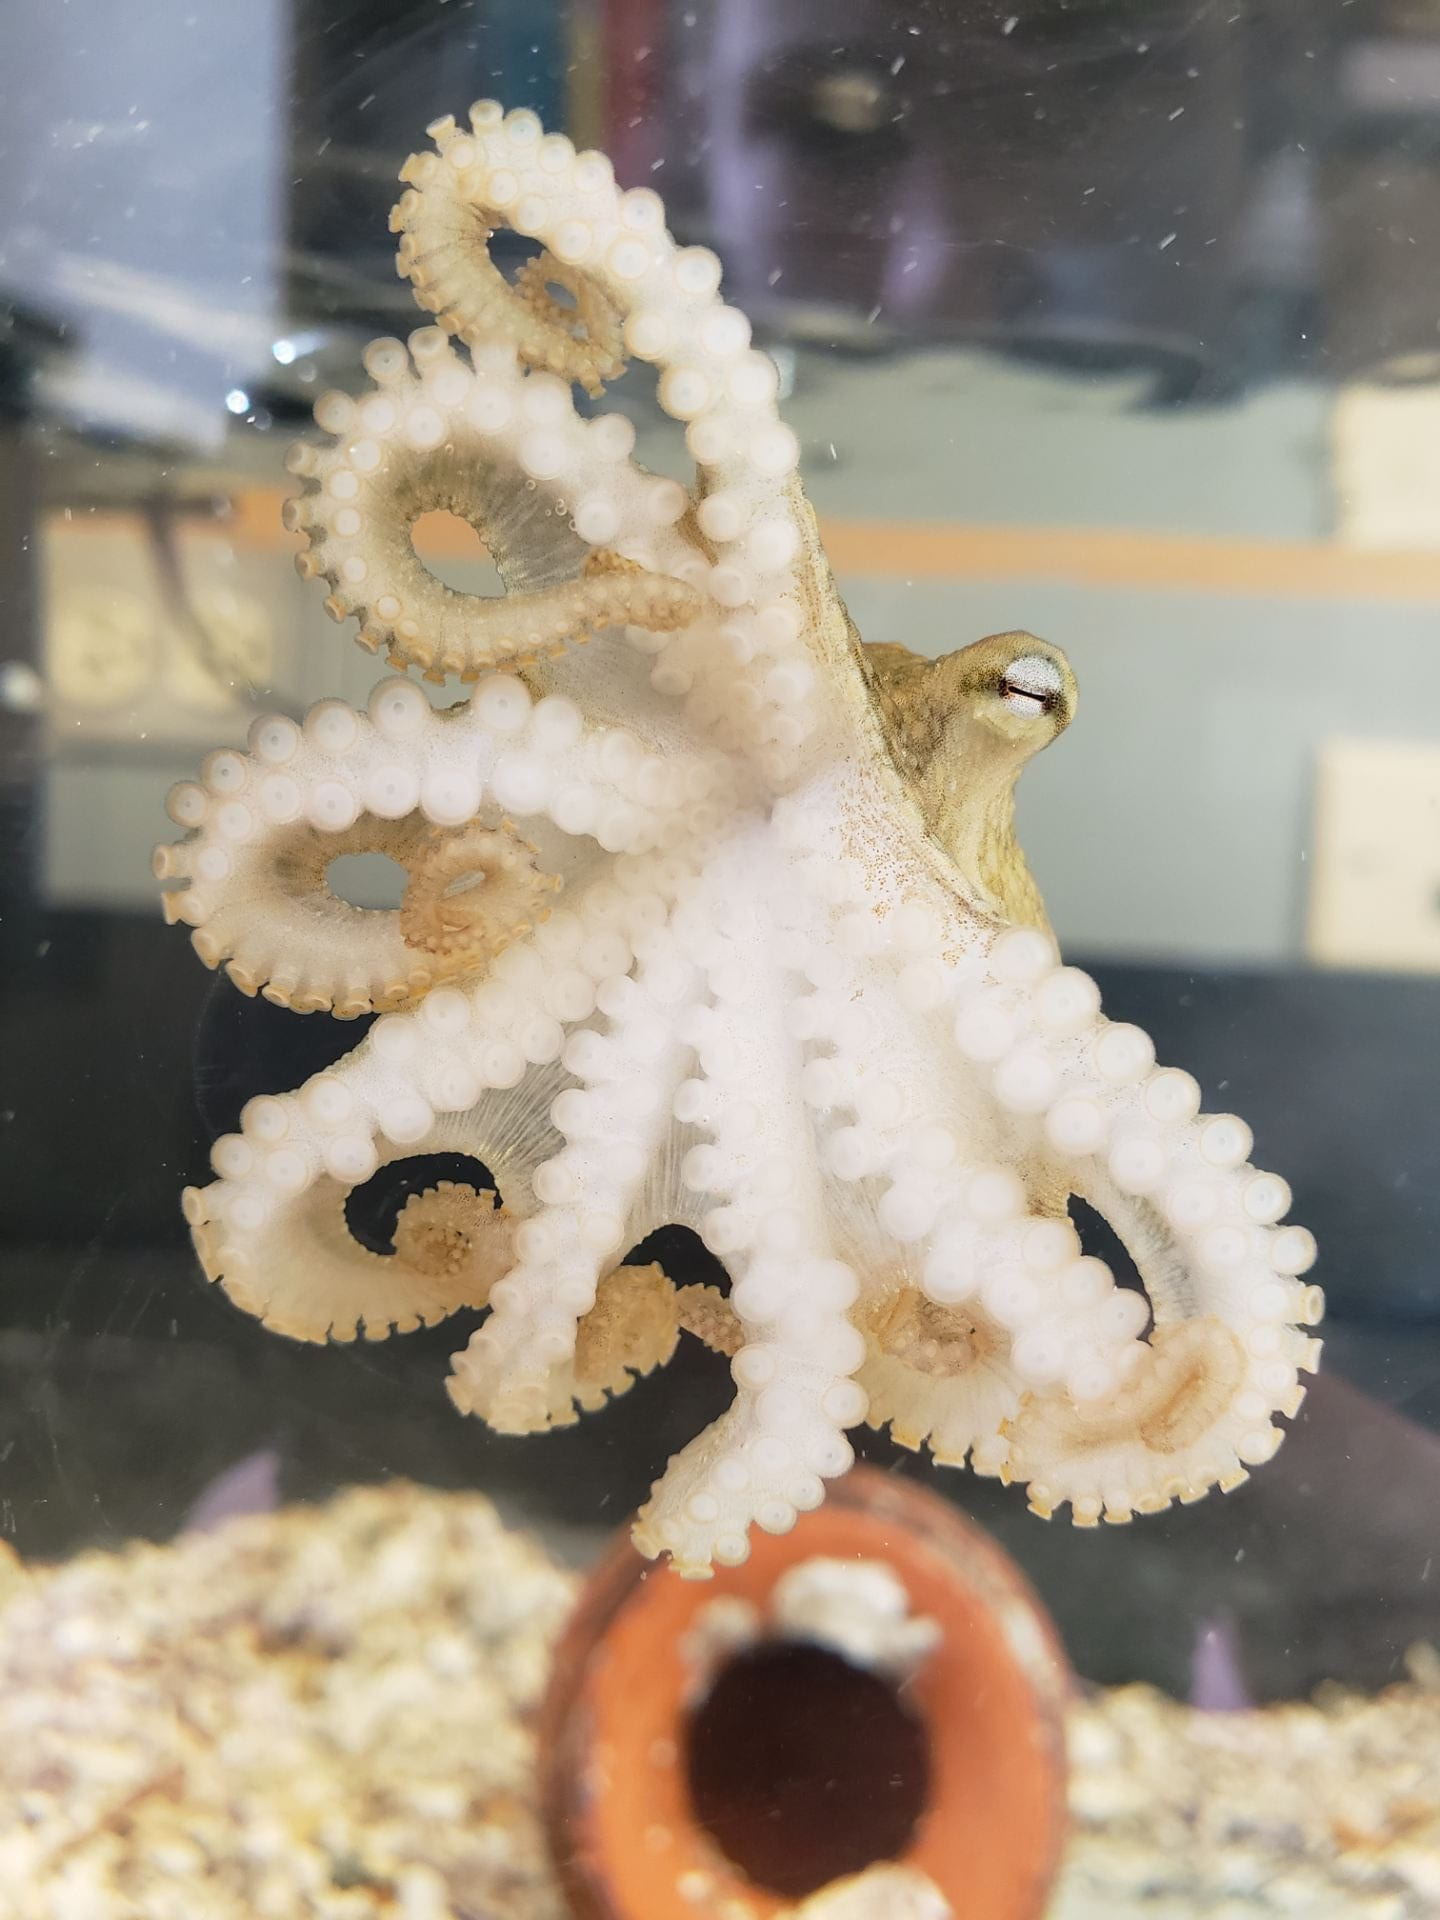 octopus hanging on glass, pot visible in background